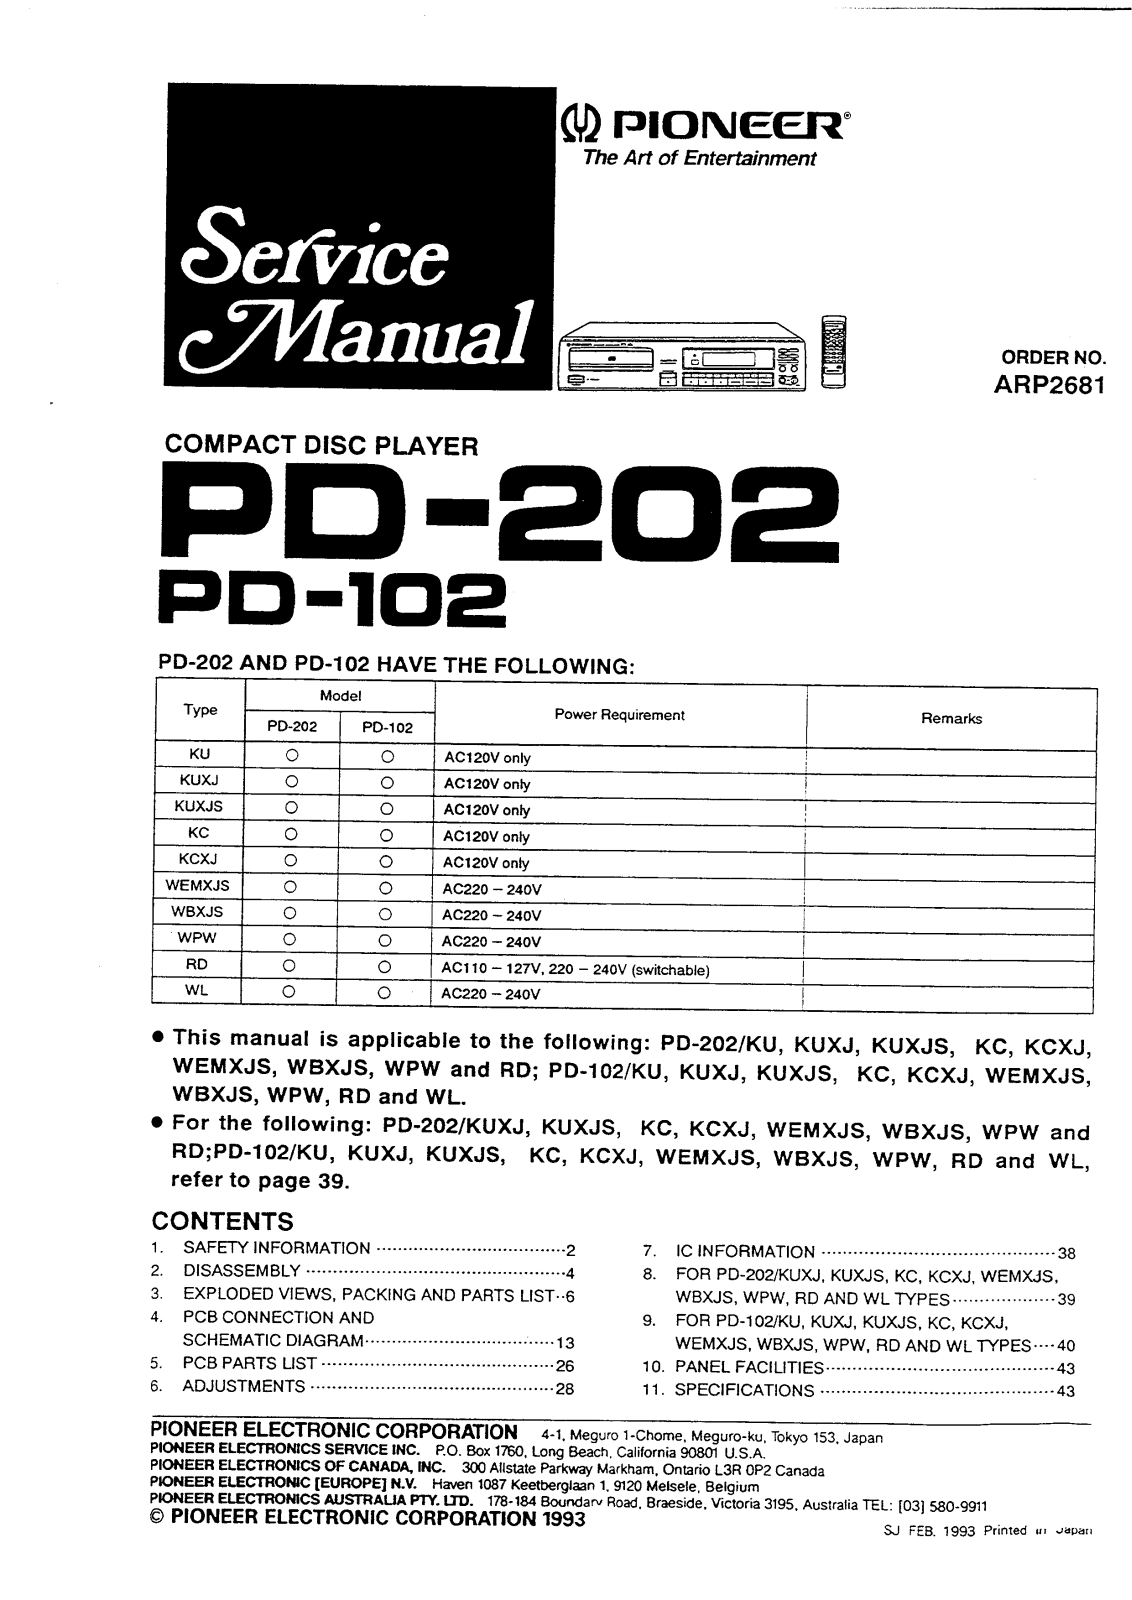 Pioneer PD-102, PD-202 Service manual